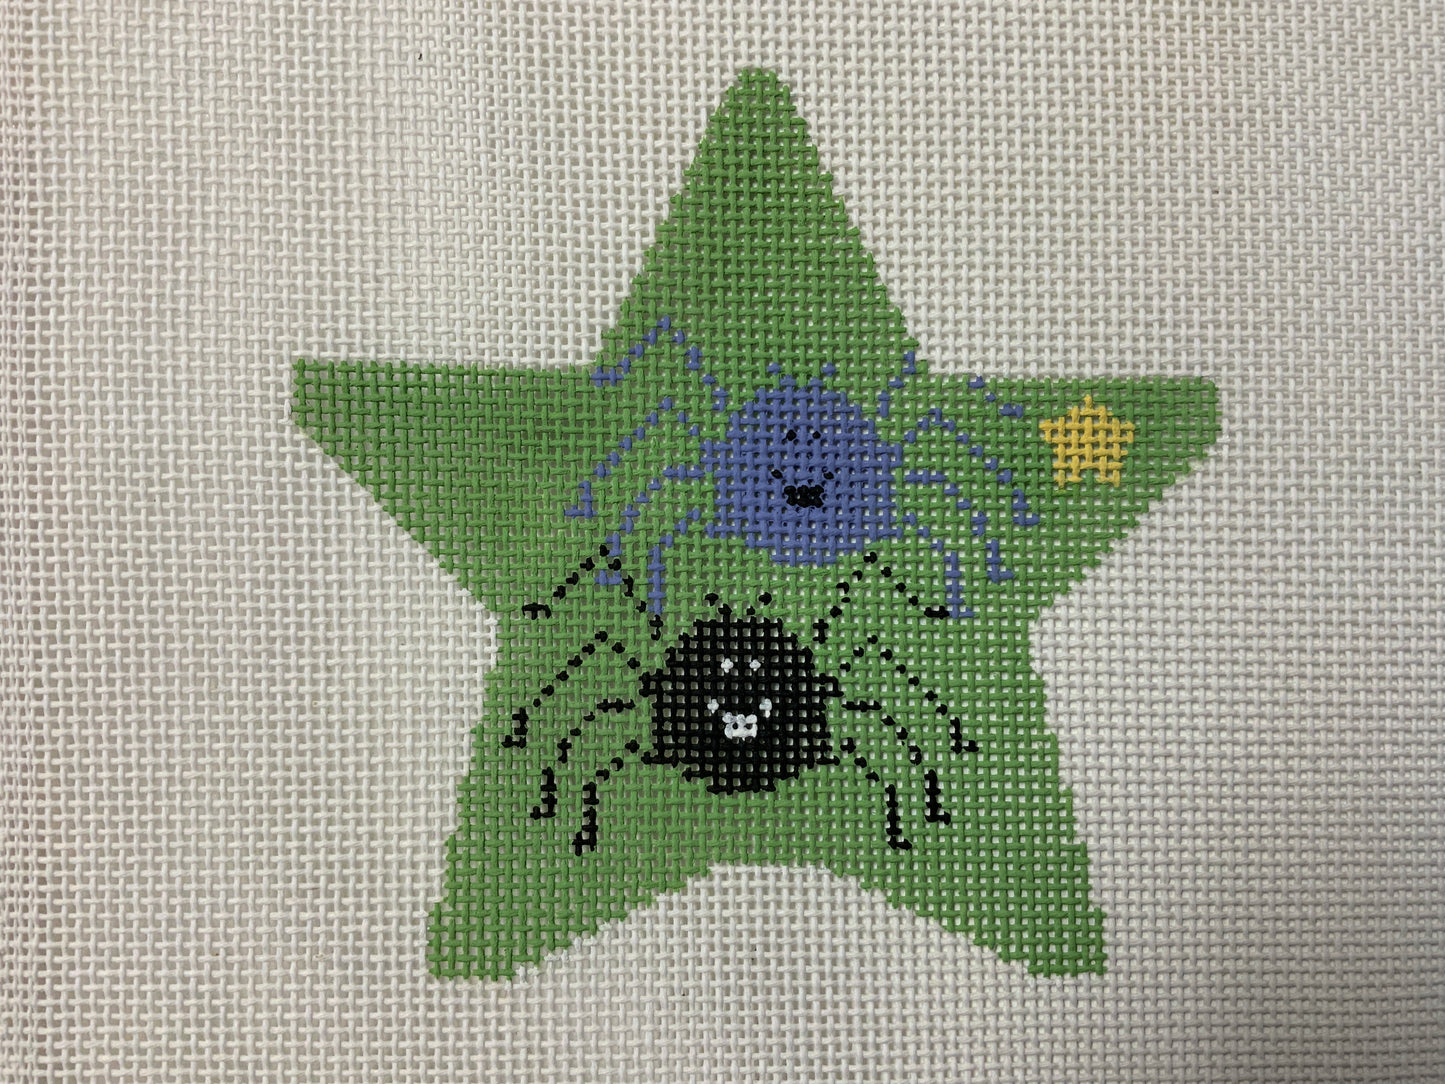 Spiders Star with Stitch Guide